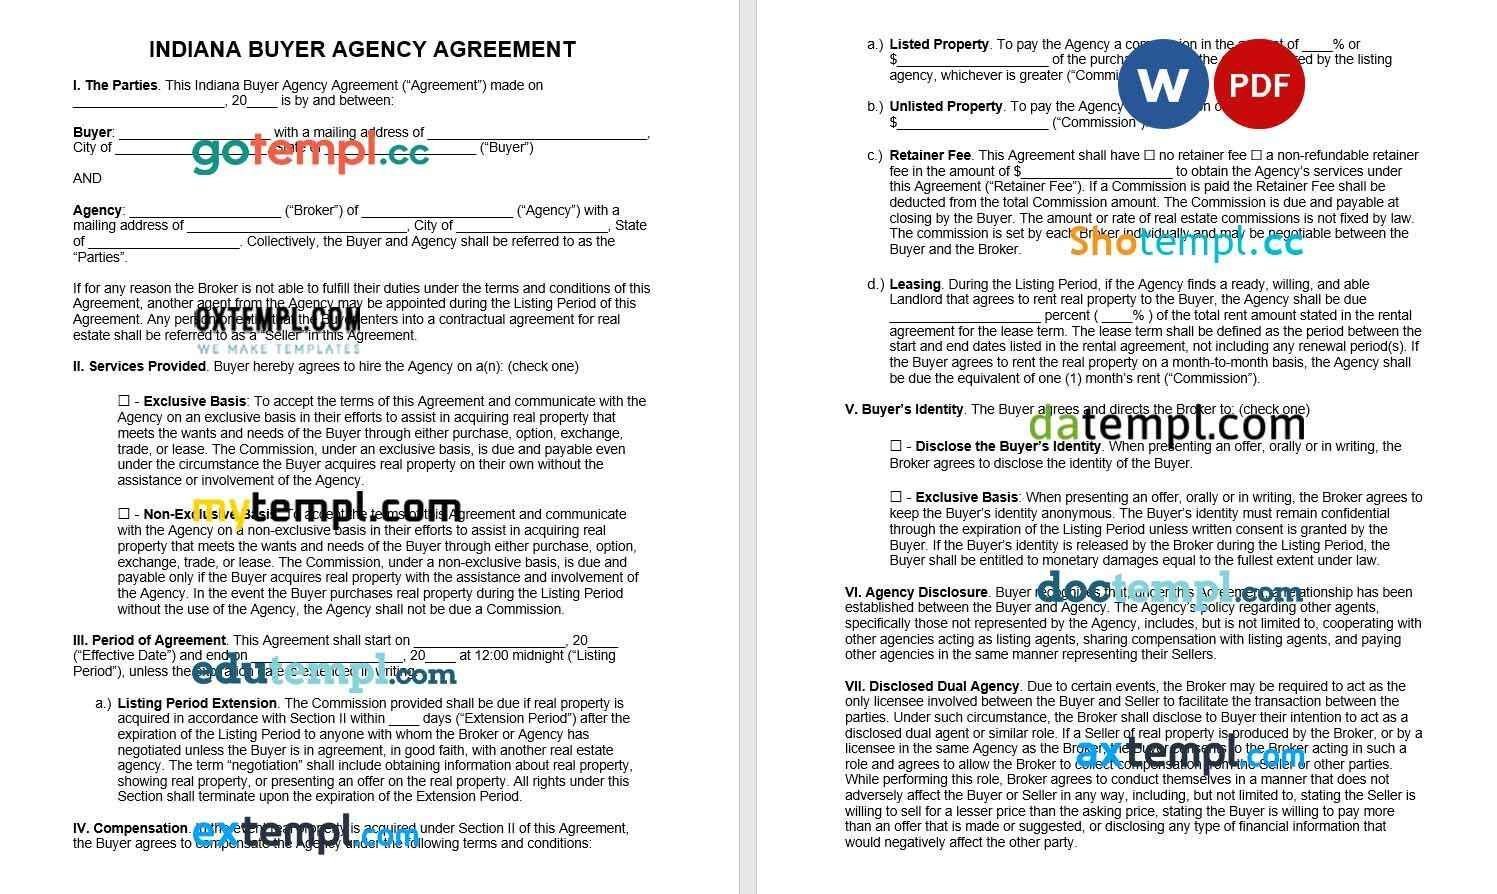 Indianna Buyer Agency Agreement Word example, completely editable